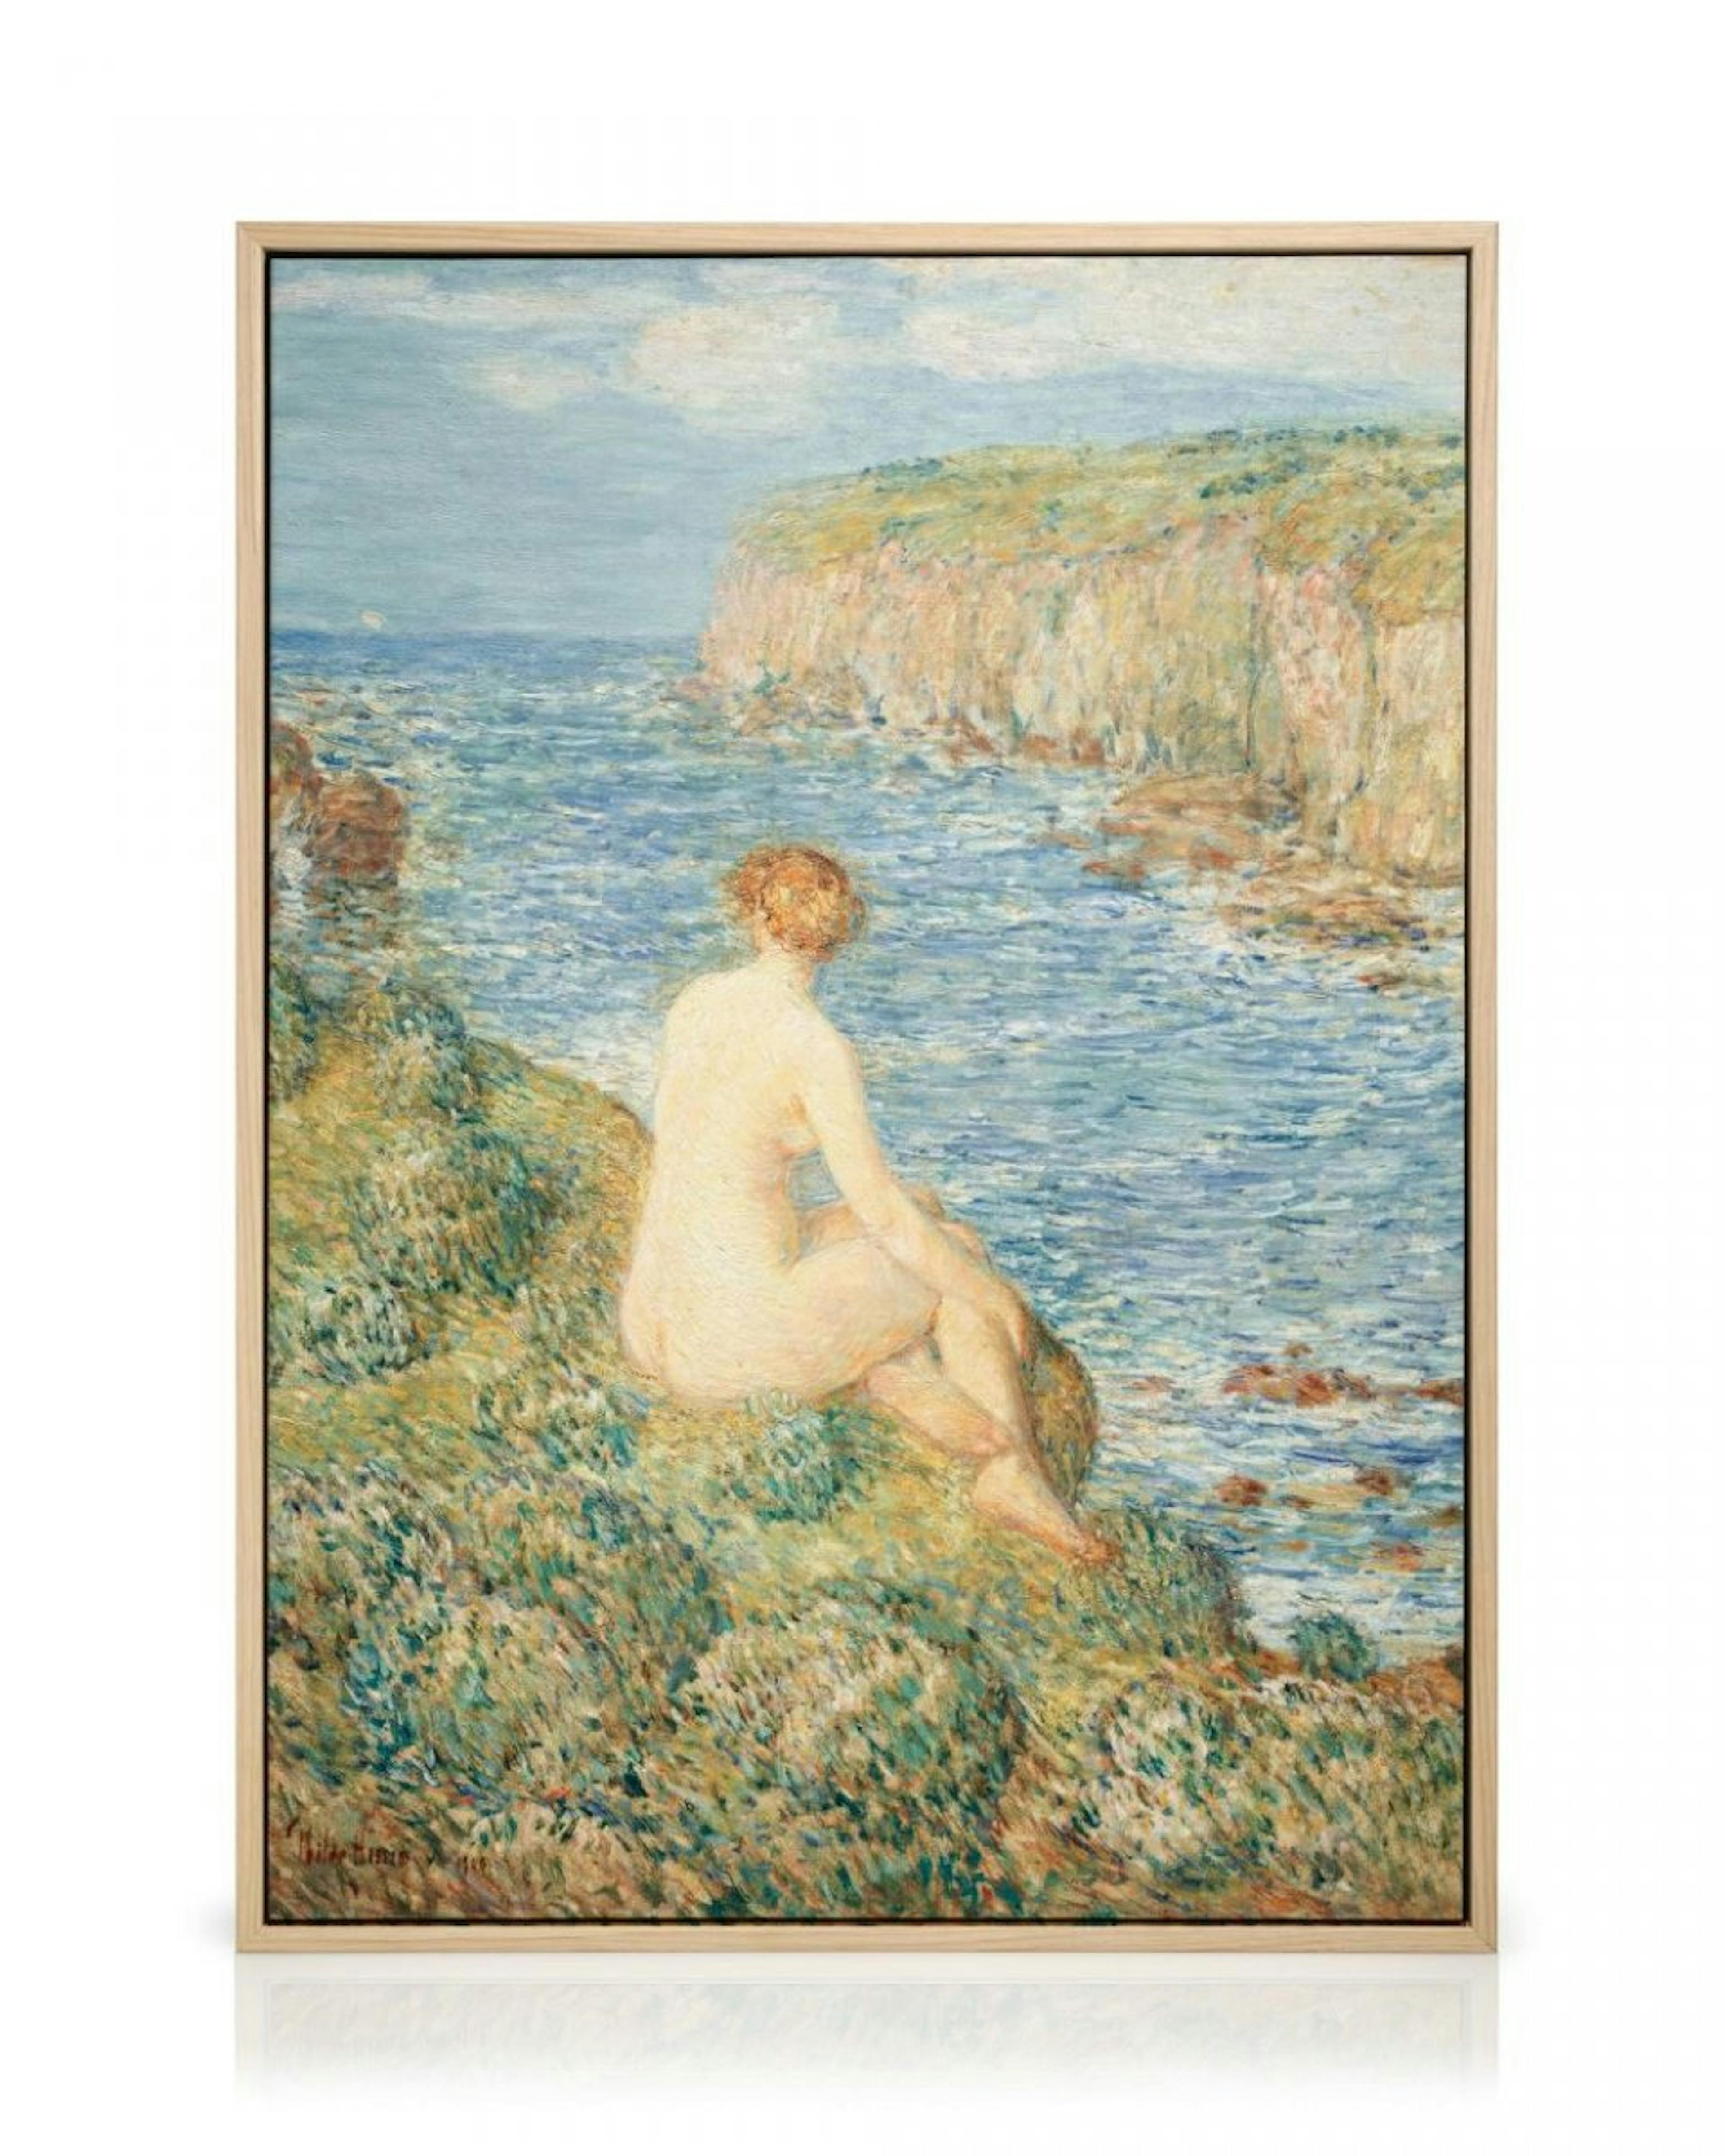 Frederick Childe Hassam - The Nymph and Sea Toile